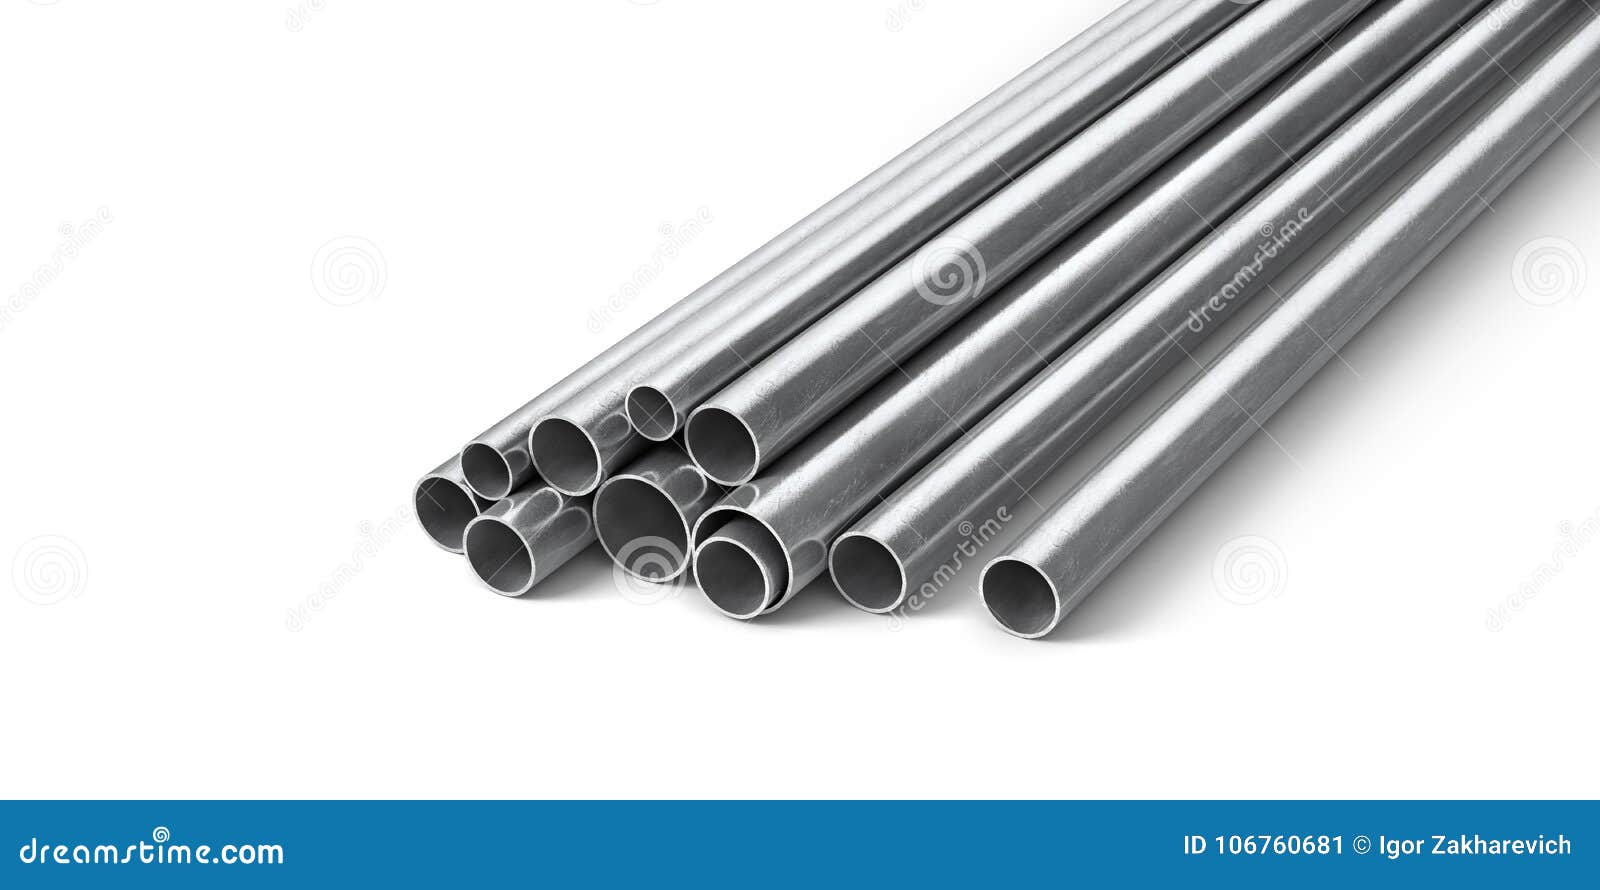 rolled metal products. steel profiles and tubes.